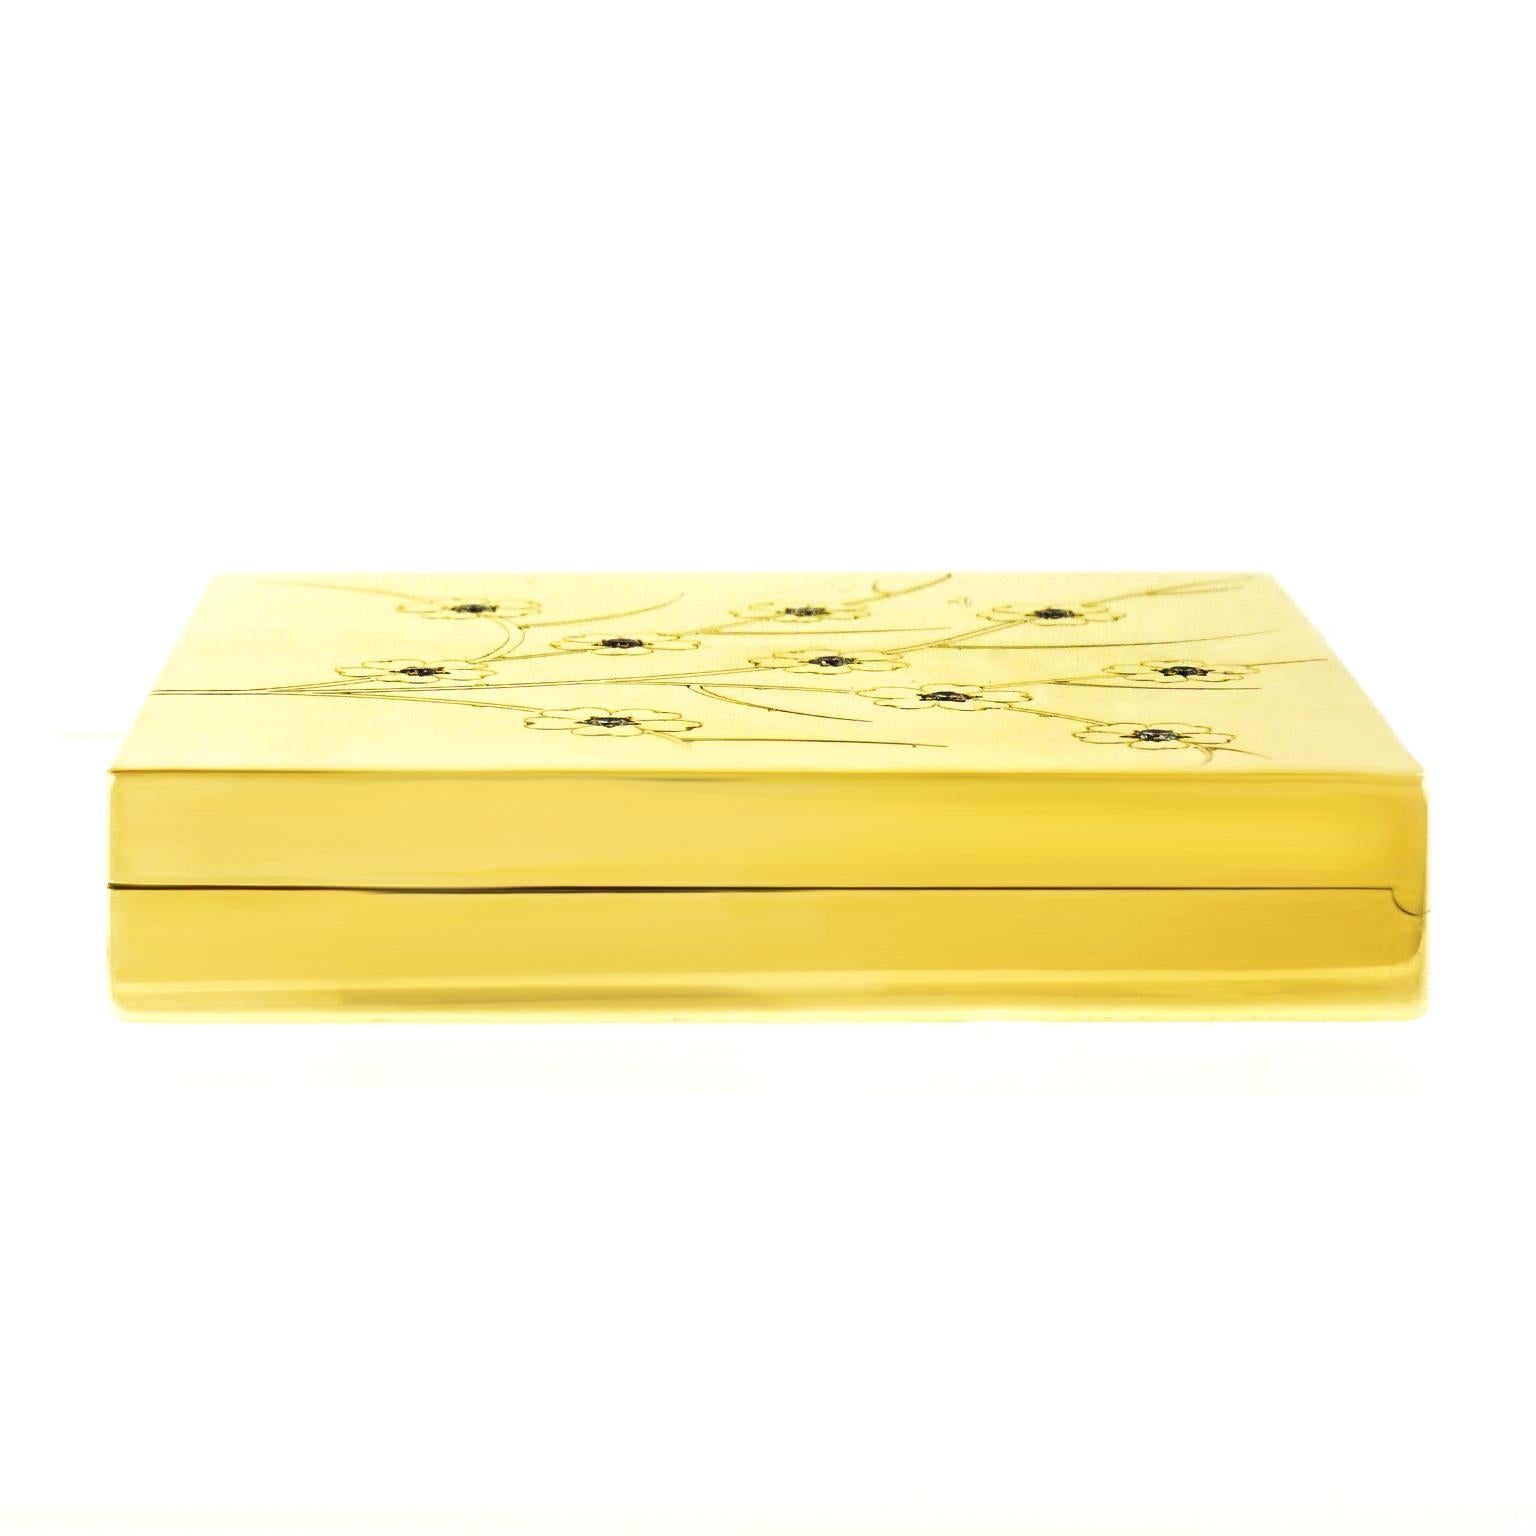 Tiffany & Co. Japanese Taste Gold Compact Case 6